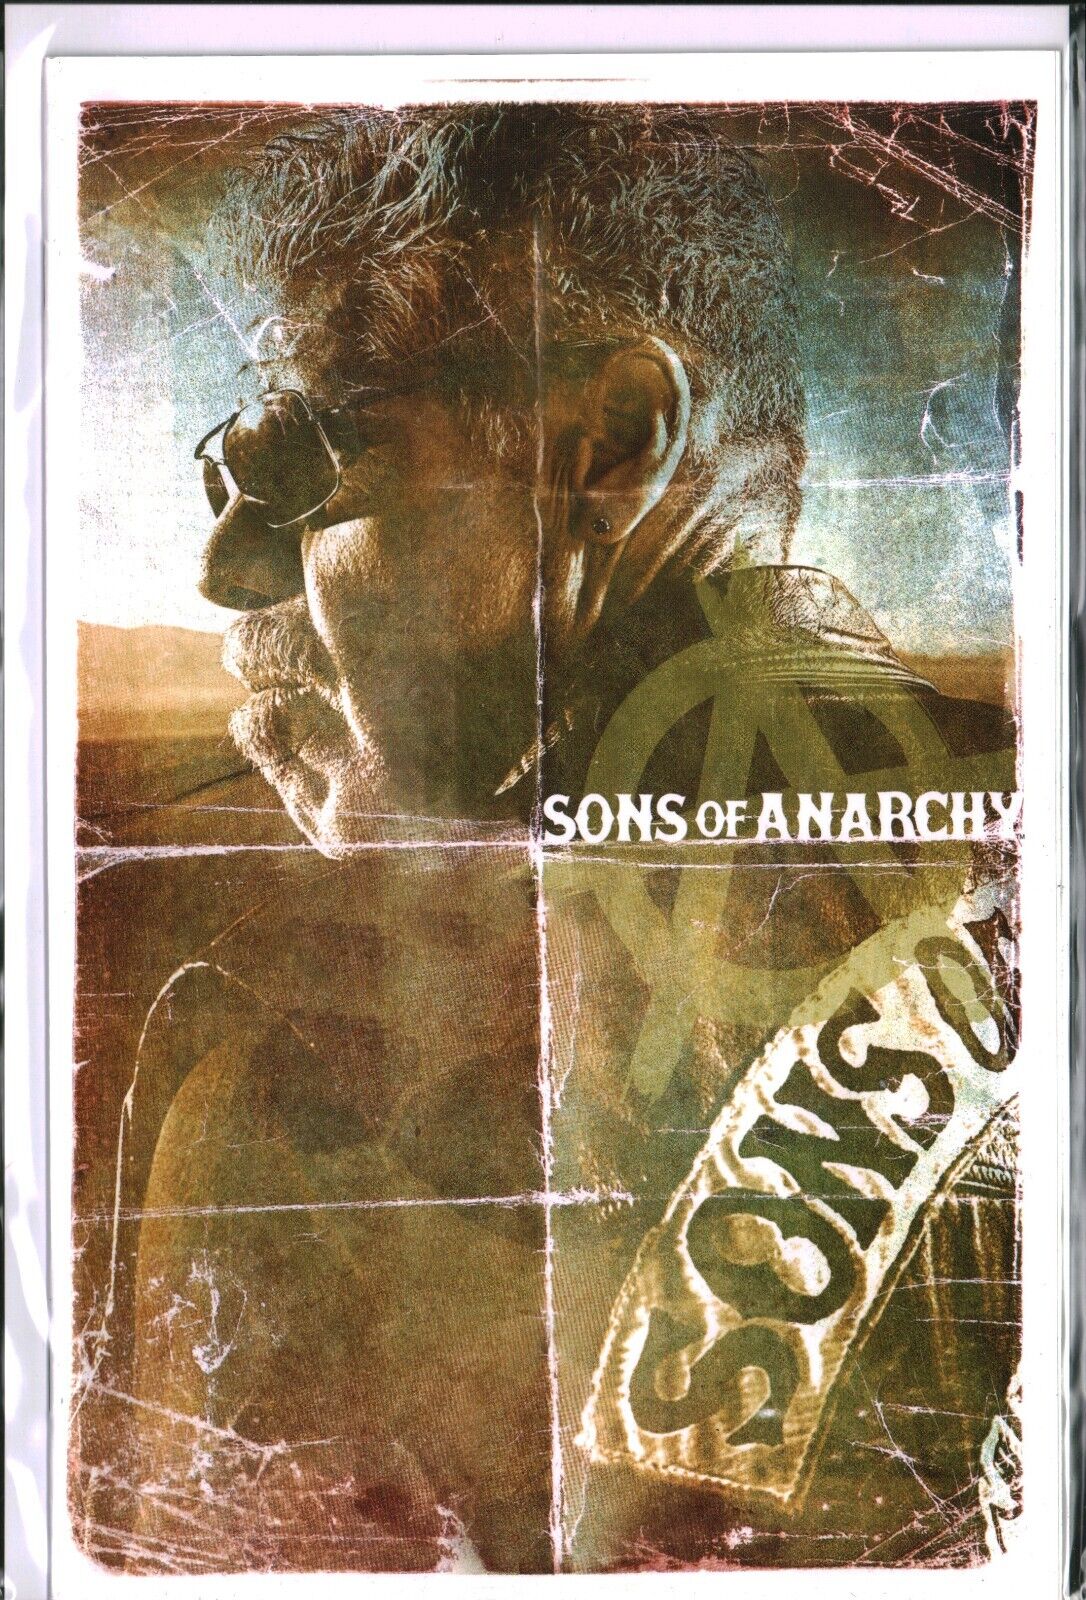 SONS of ANARCHY #1-6 Jetpack VARIANT Boom (2013) COMPLETE NM (9.4)